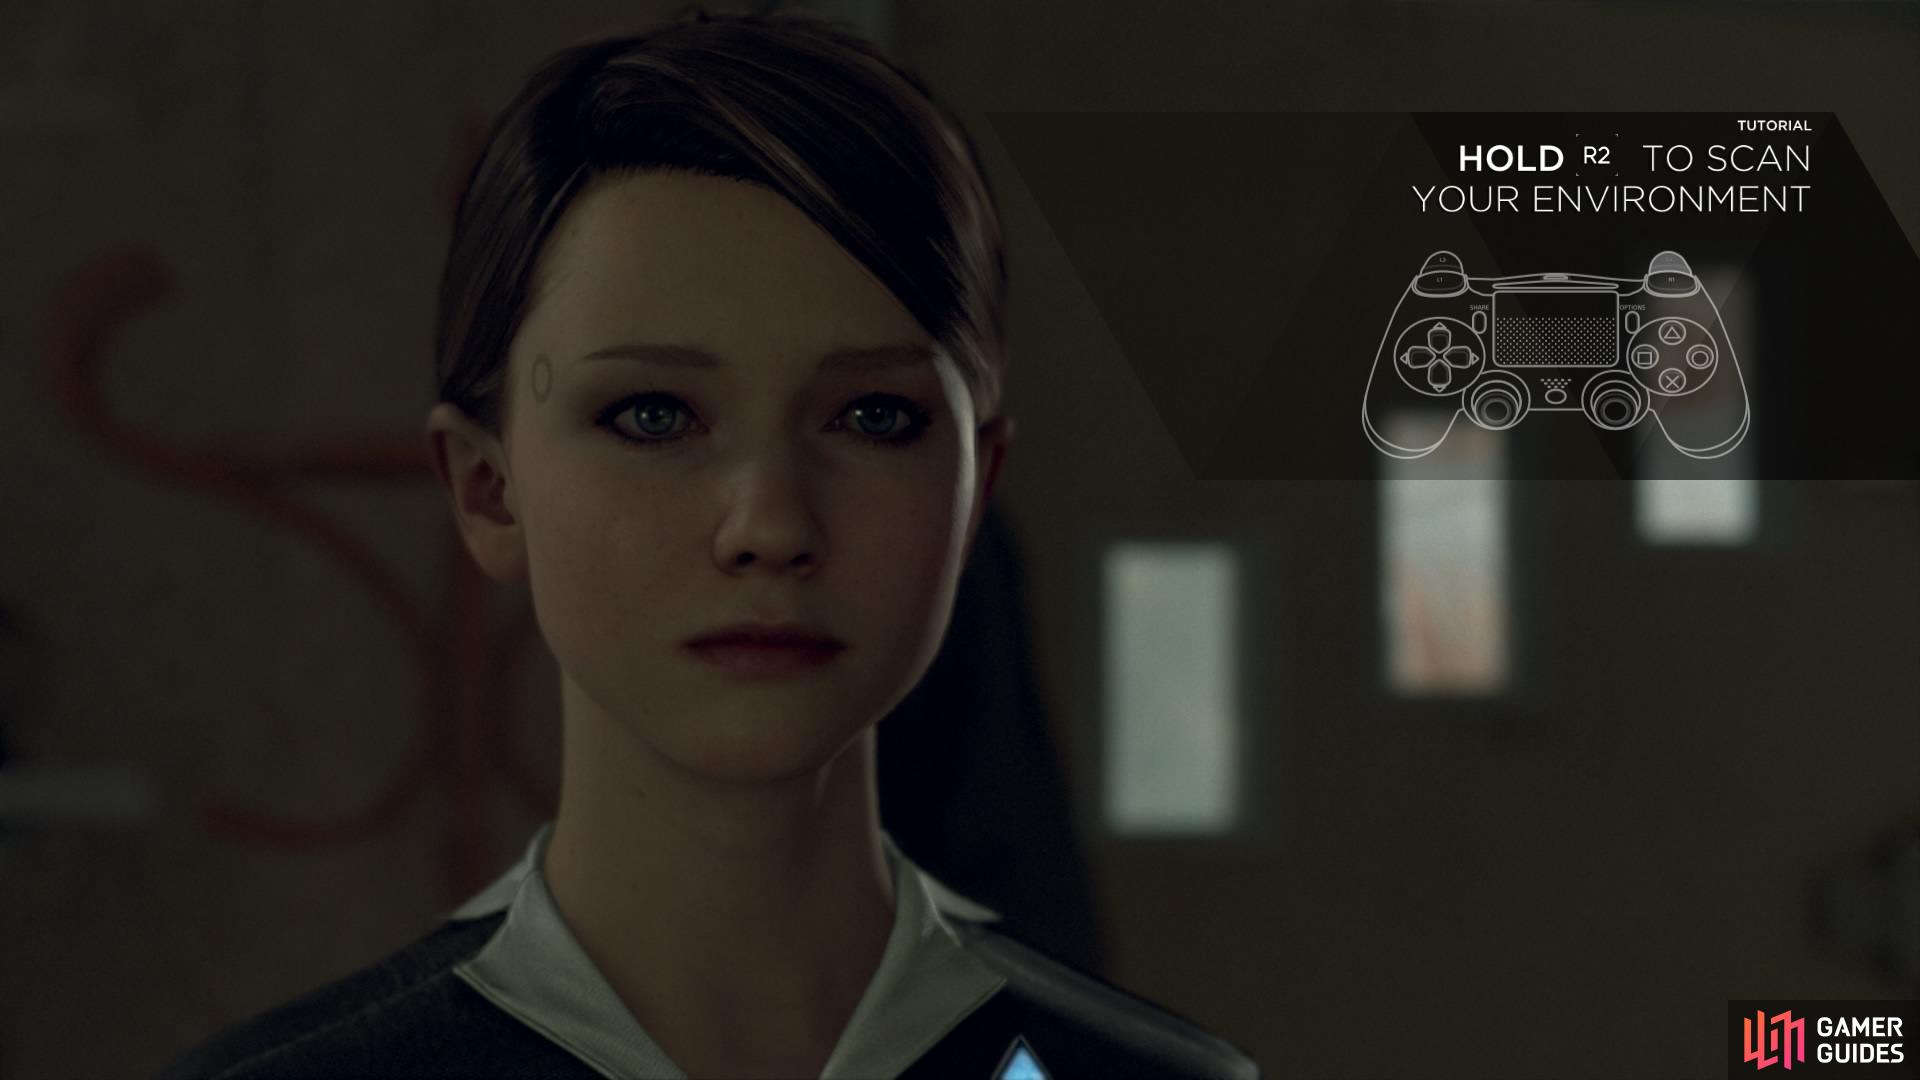 Detroit: Become Human Debuts Three New Character Trailers